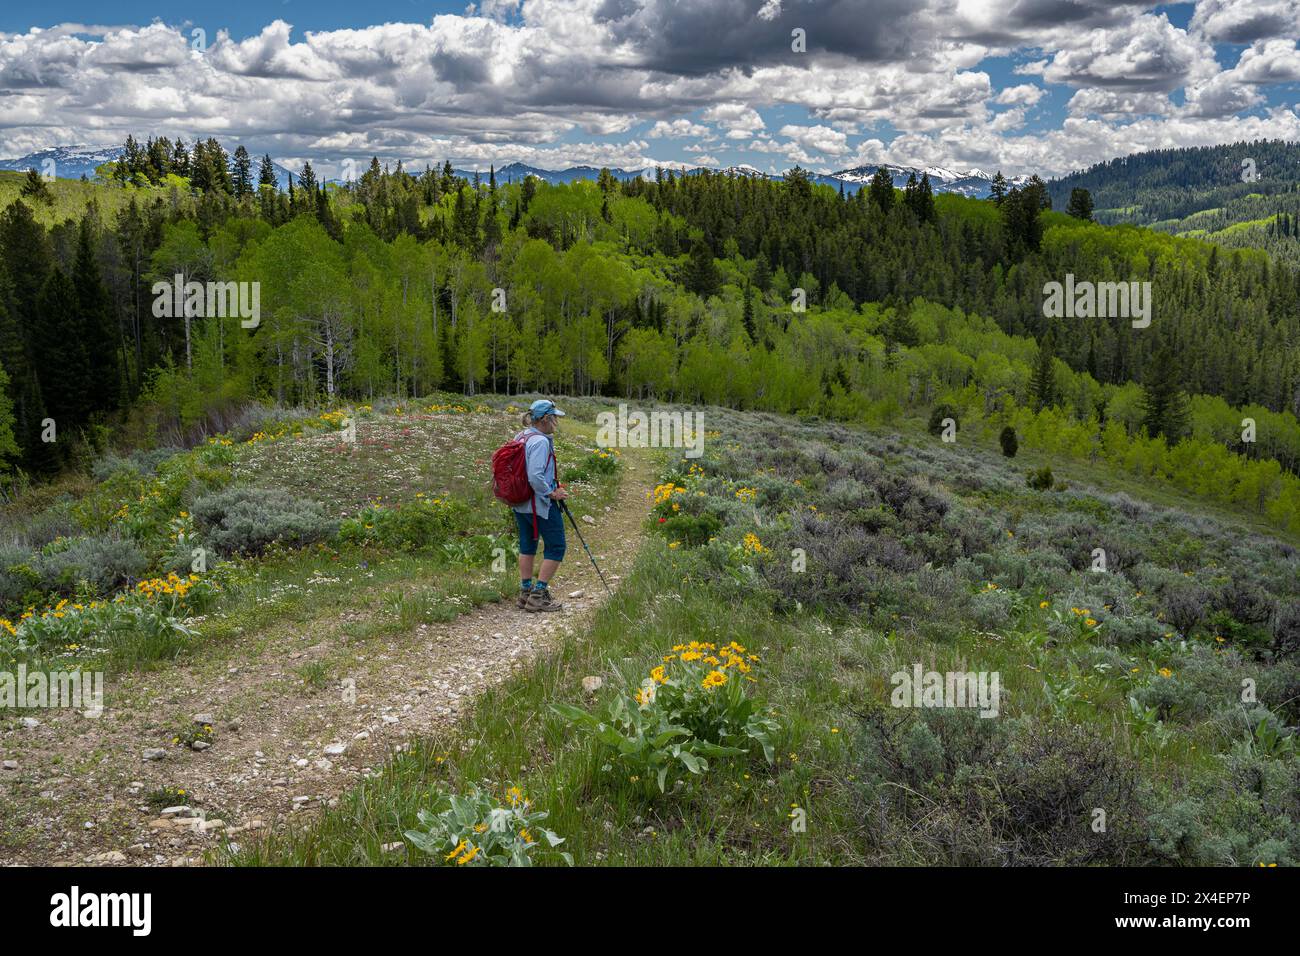 USA, Idaho. Woman hiking on trail in Big Hole Mountains in spring. Stock Photo